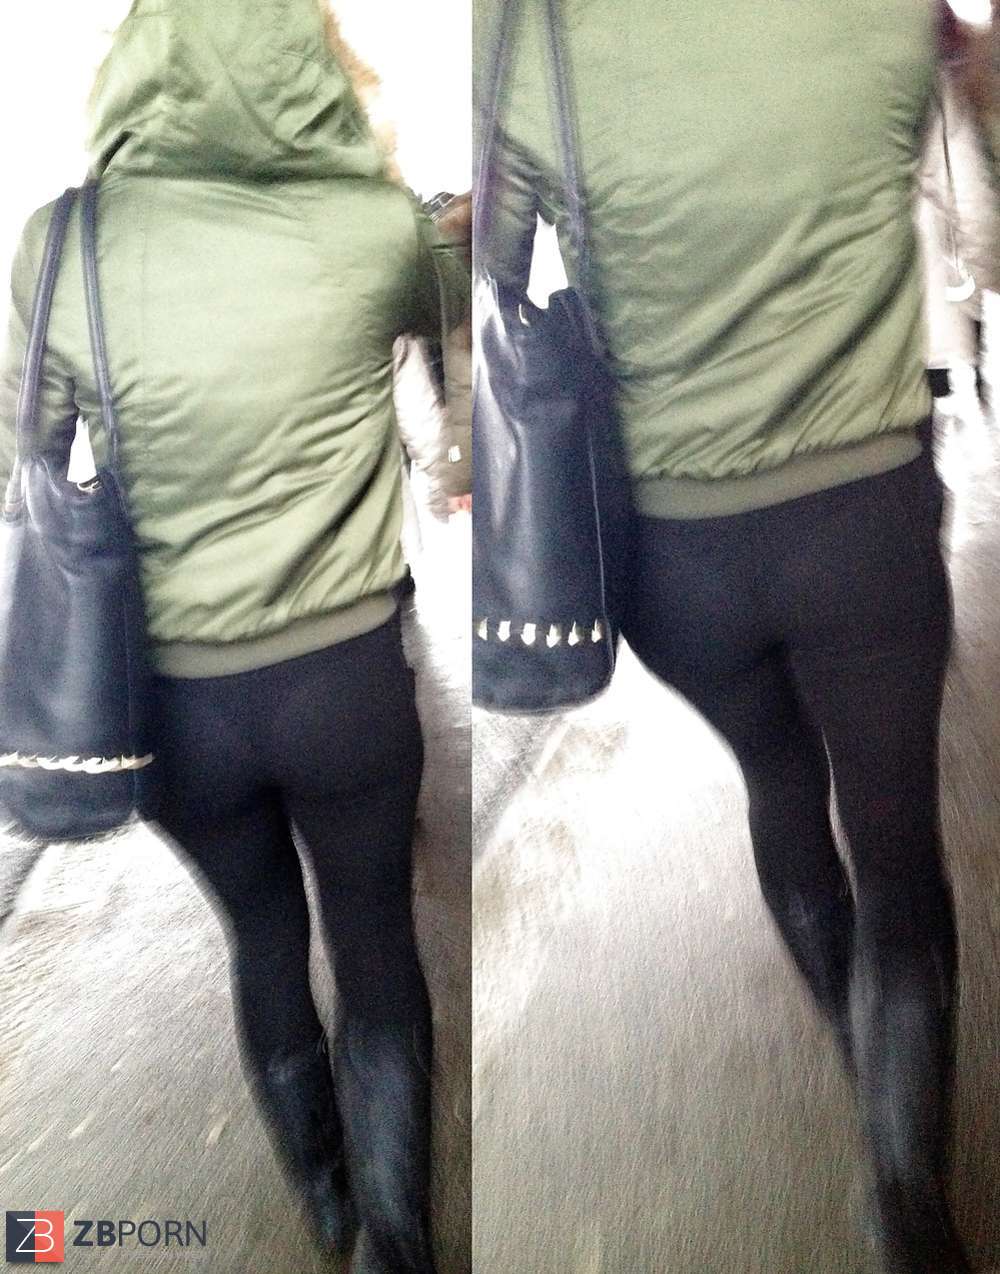 Offsides recommend best of candid leggings ass